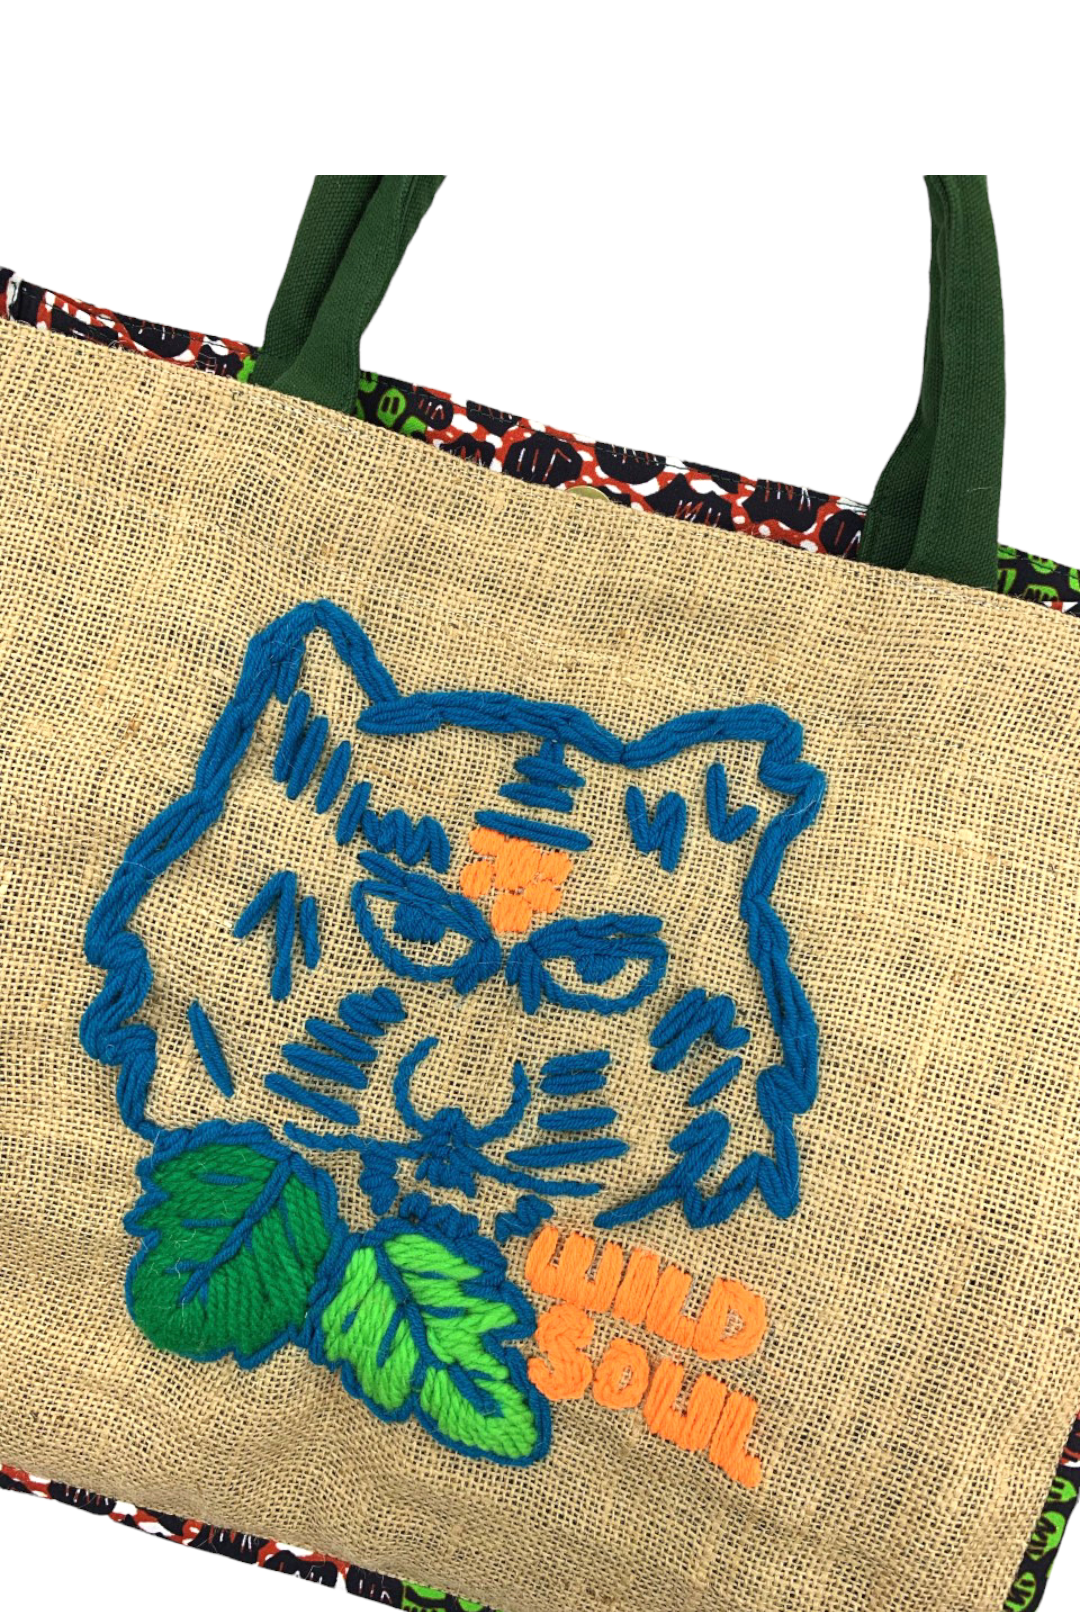 AFRICAN EMBROIDERED TOTE BAG